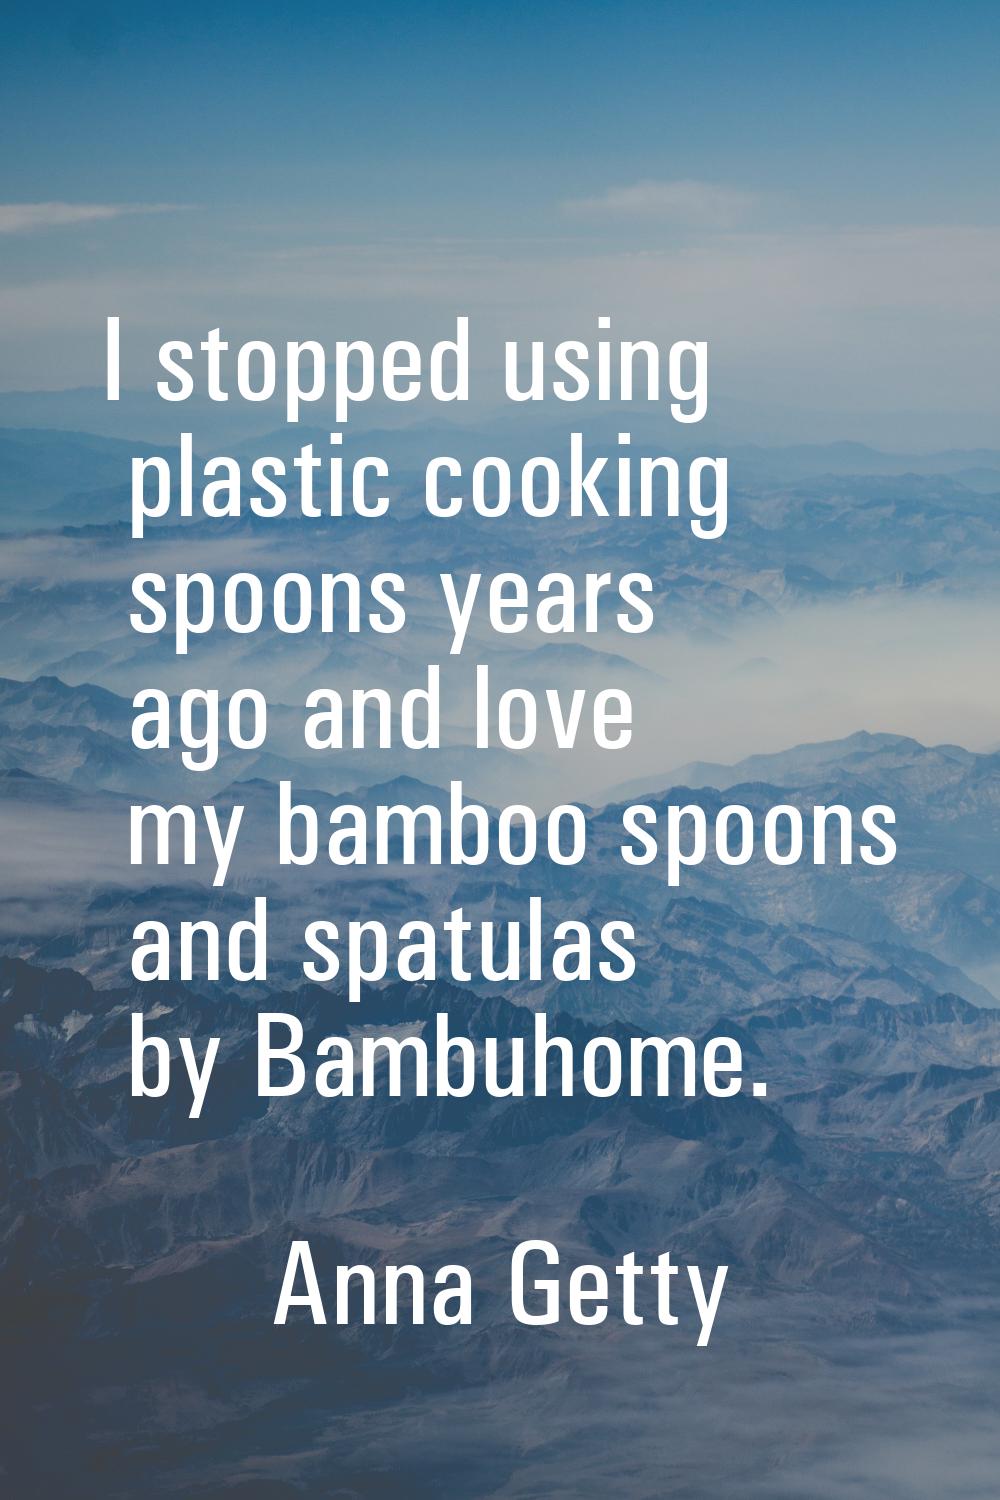 I stopped using plastic cooking spoons years ago and love my bamboo spoons and spatulas by Bambuhom